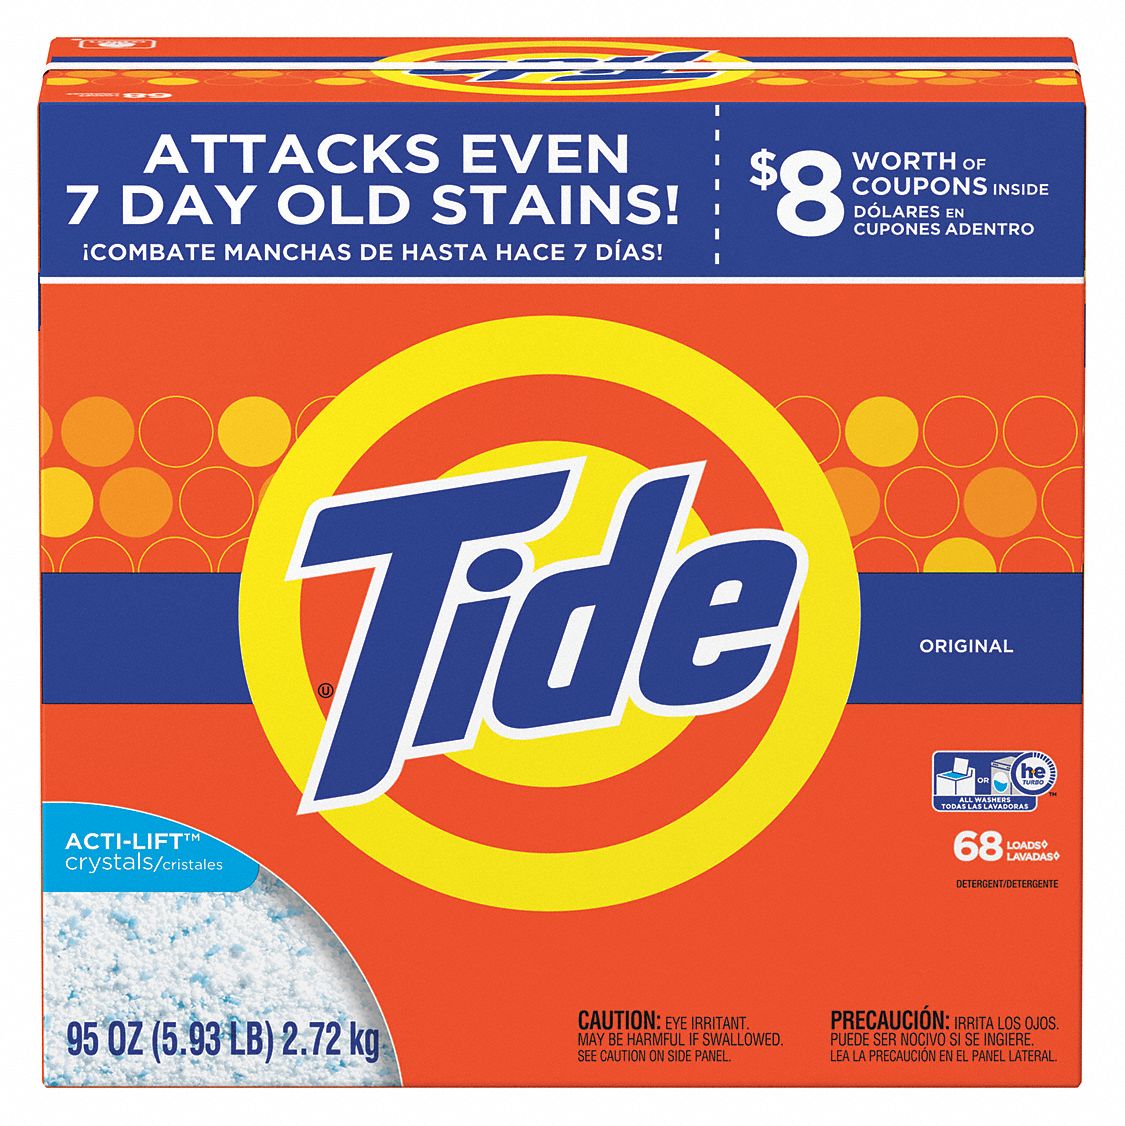 Laundry Detergent: Traditional, Box, 95 oz, Powder, Unscented, 3 PK